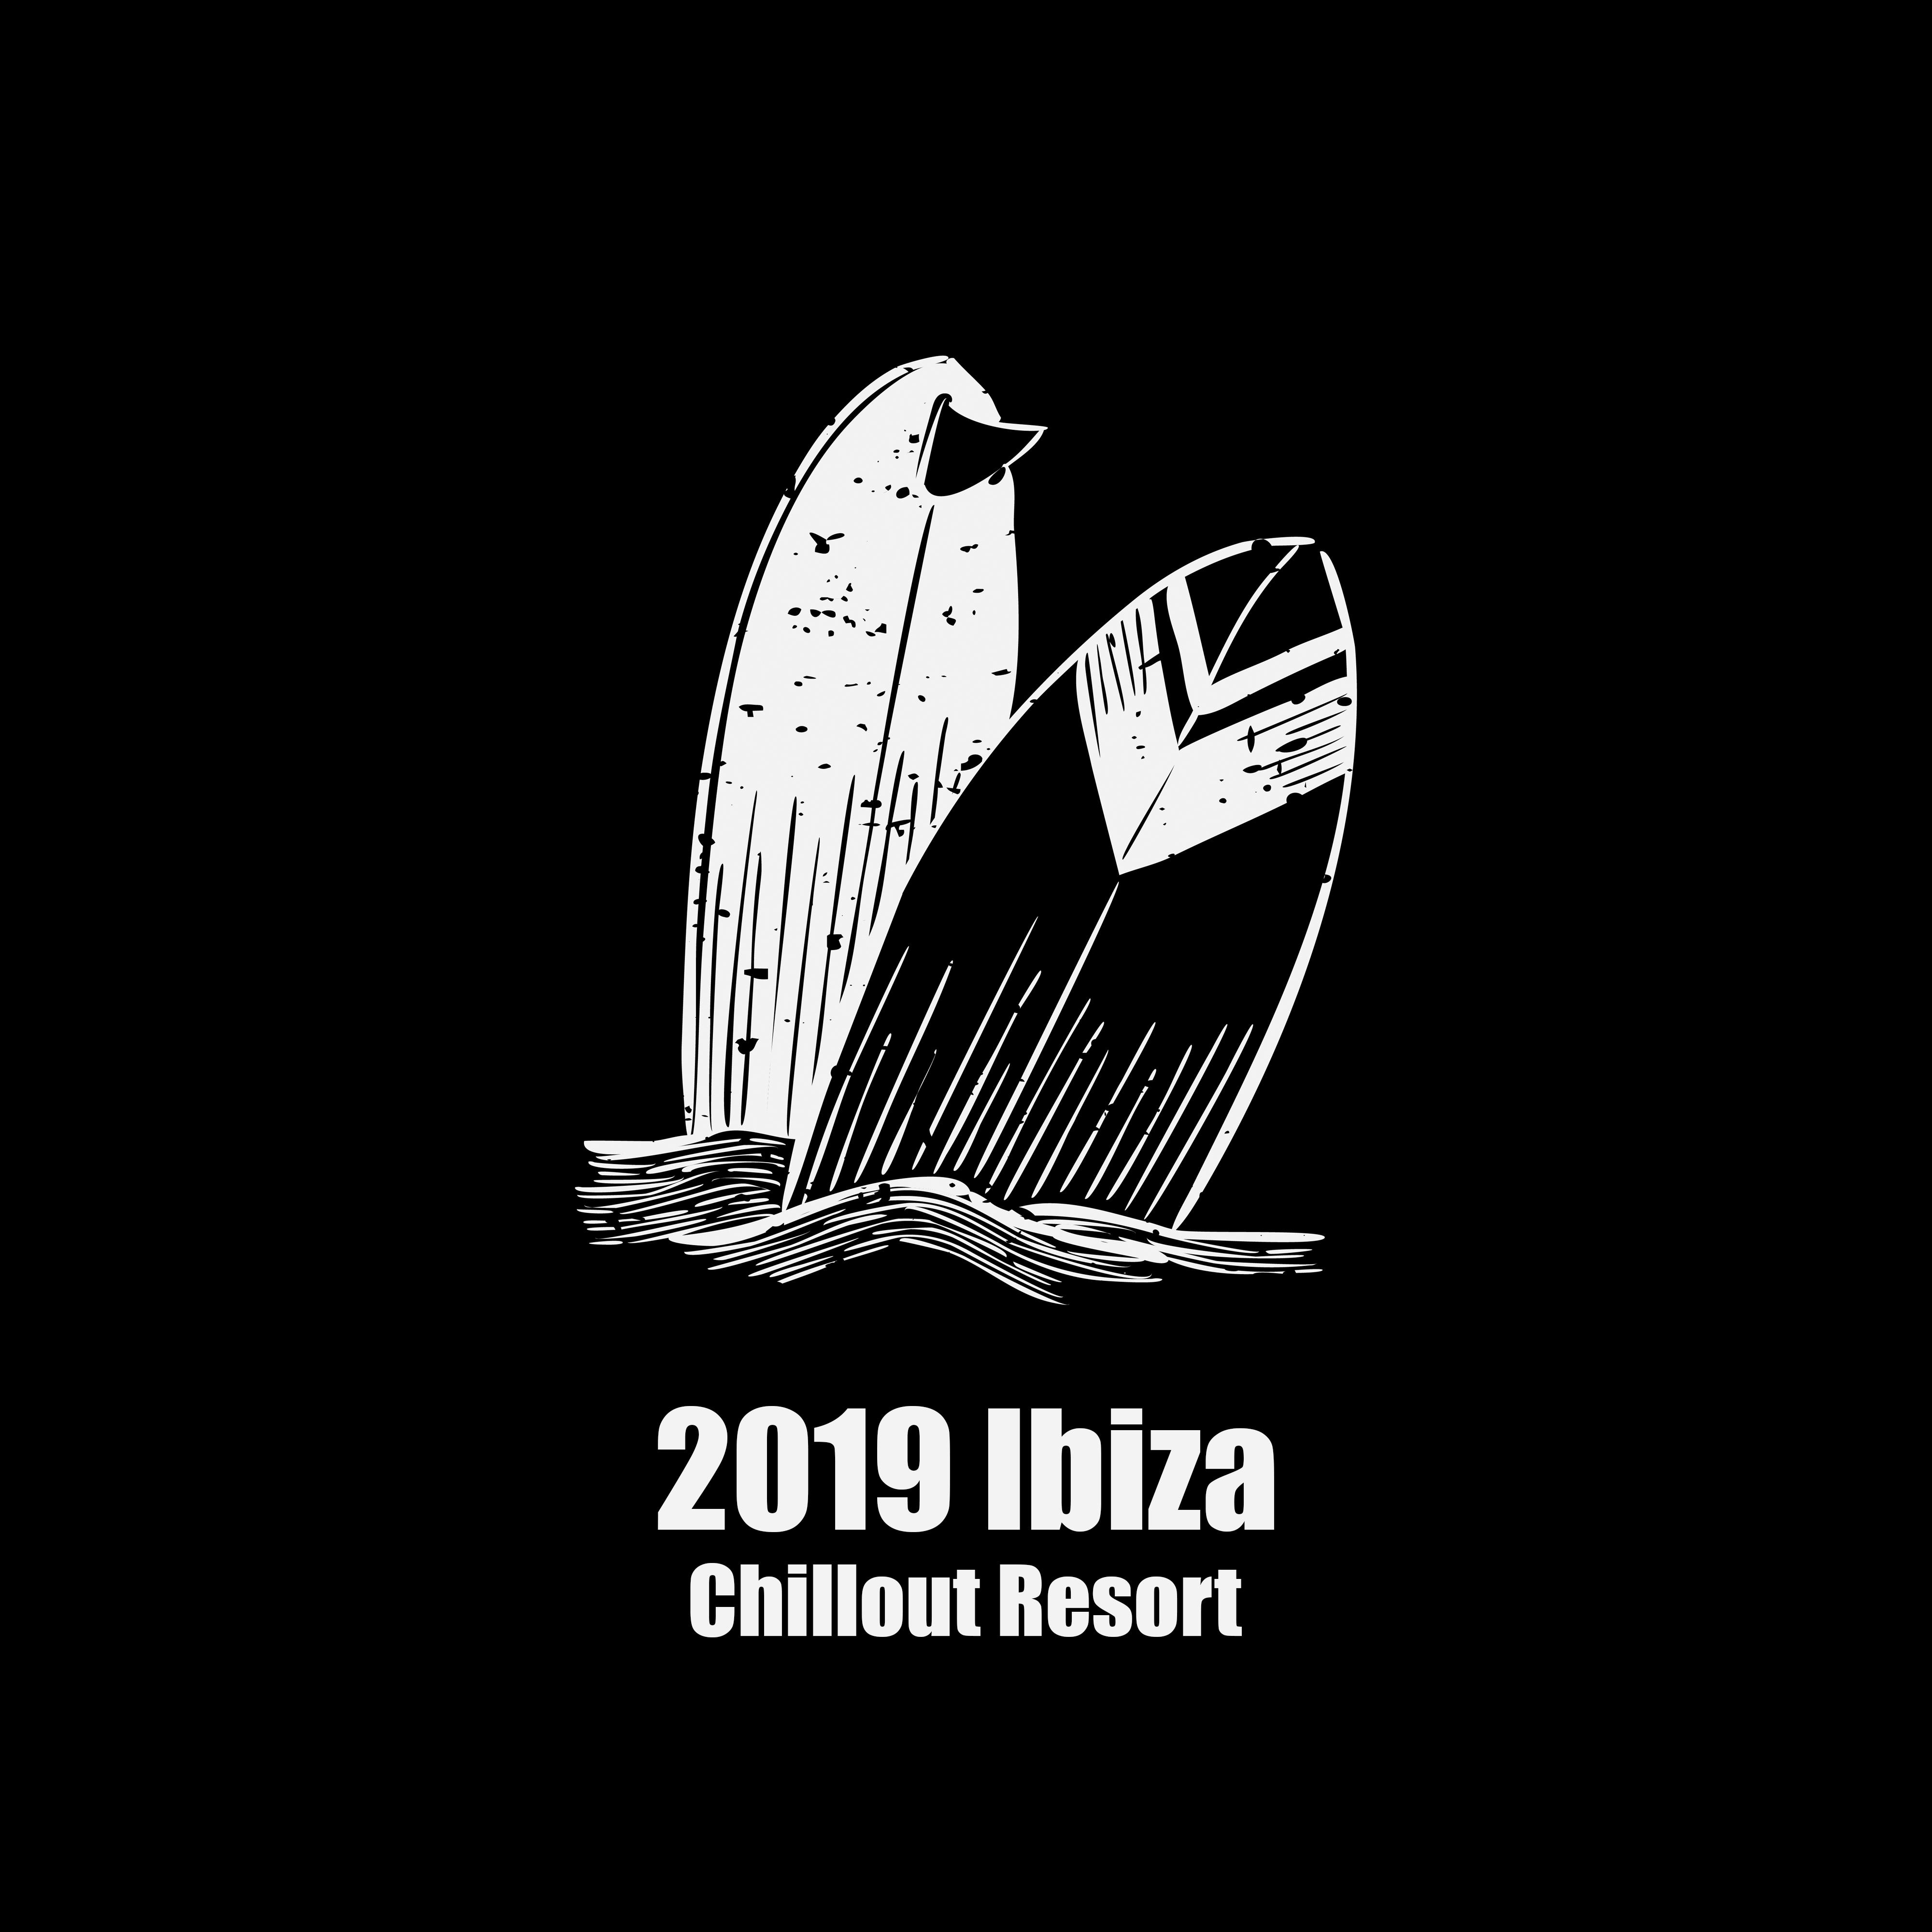 2019 Ibiza Chillout Resort – Summer Hits 2019, Calming Sounds for Relax, Sleep, Rest, Pure Mind, Chillout Balearic, Ibiza 2019